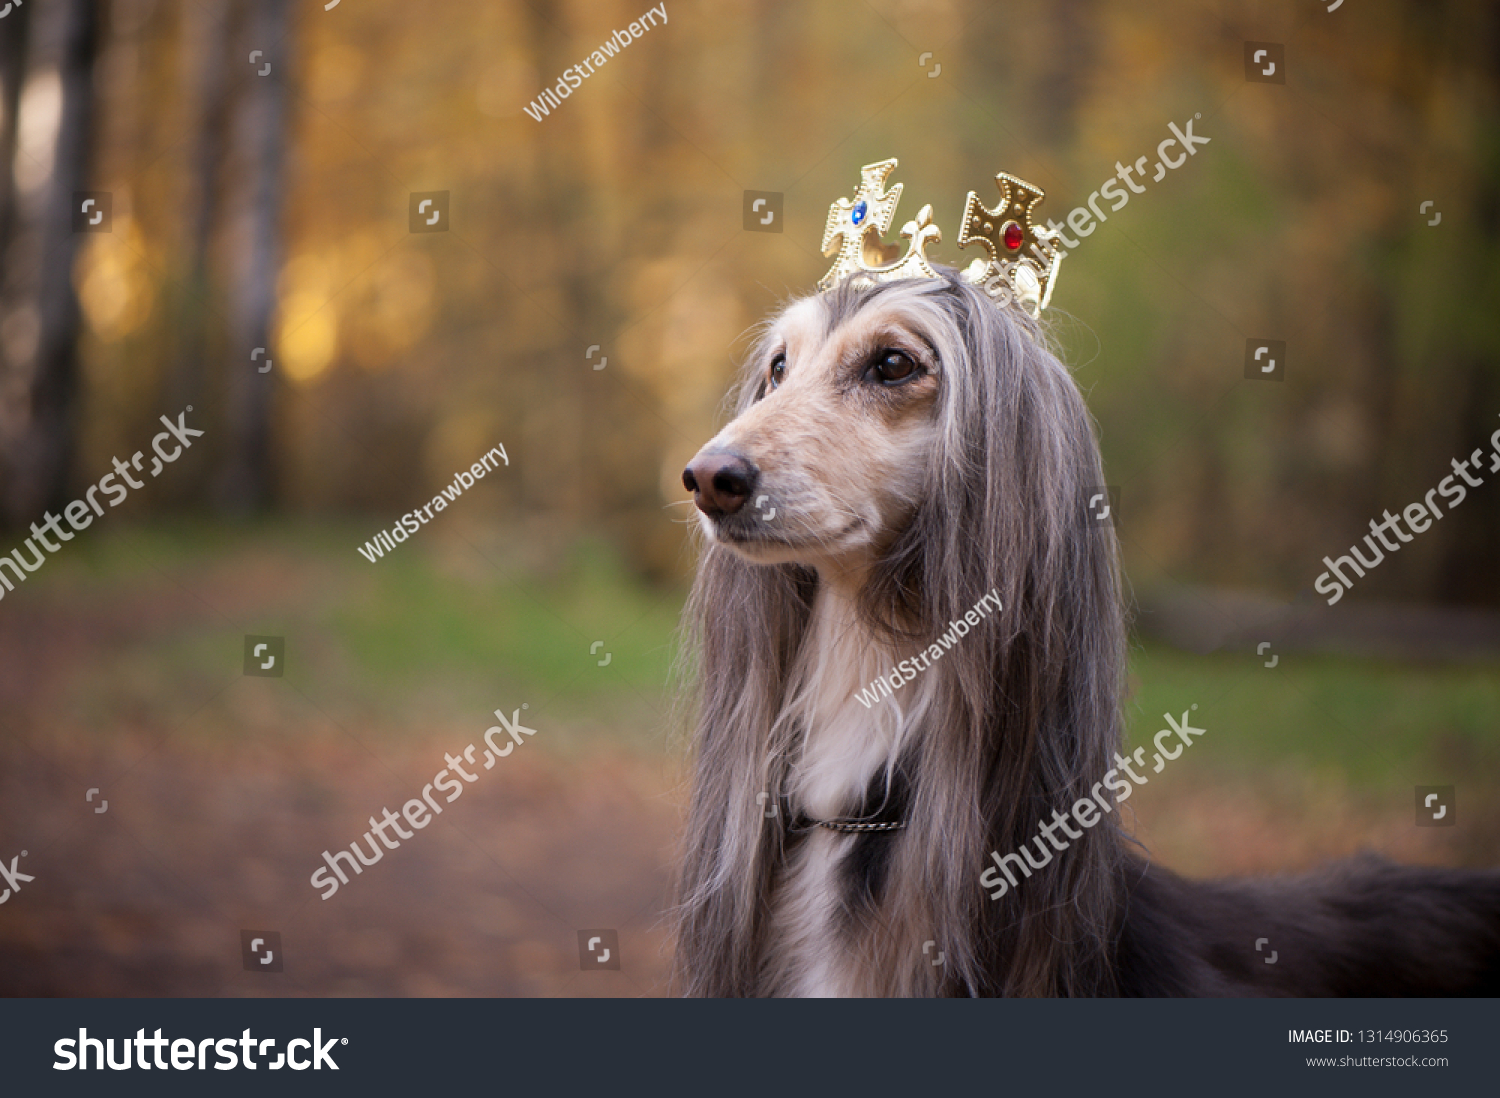 Dog in the crown  afghan hounds. In royal clothes on a natural background. Dog lord  or prince, dog power theme #1314906365